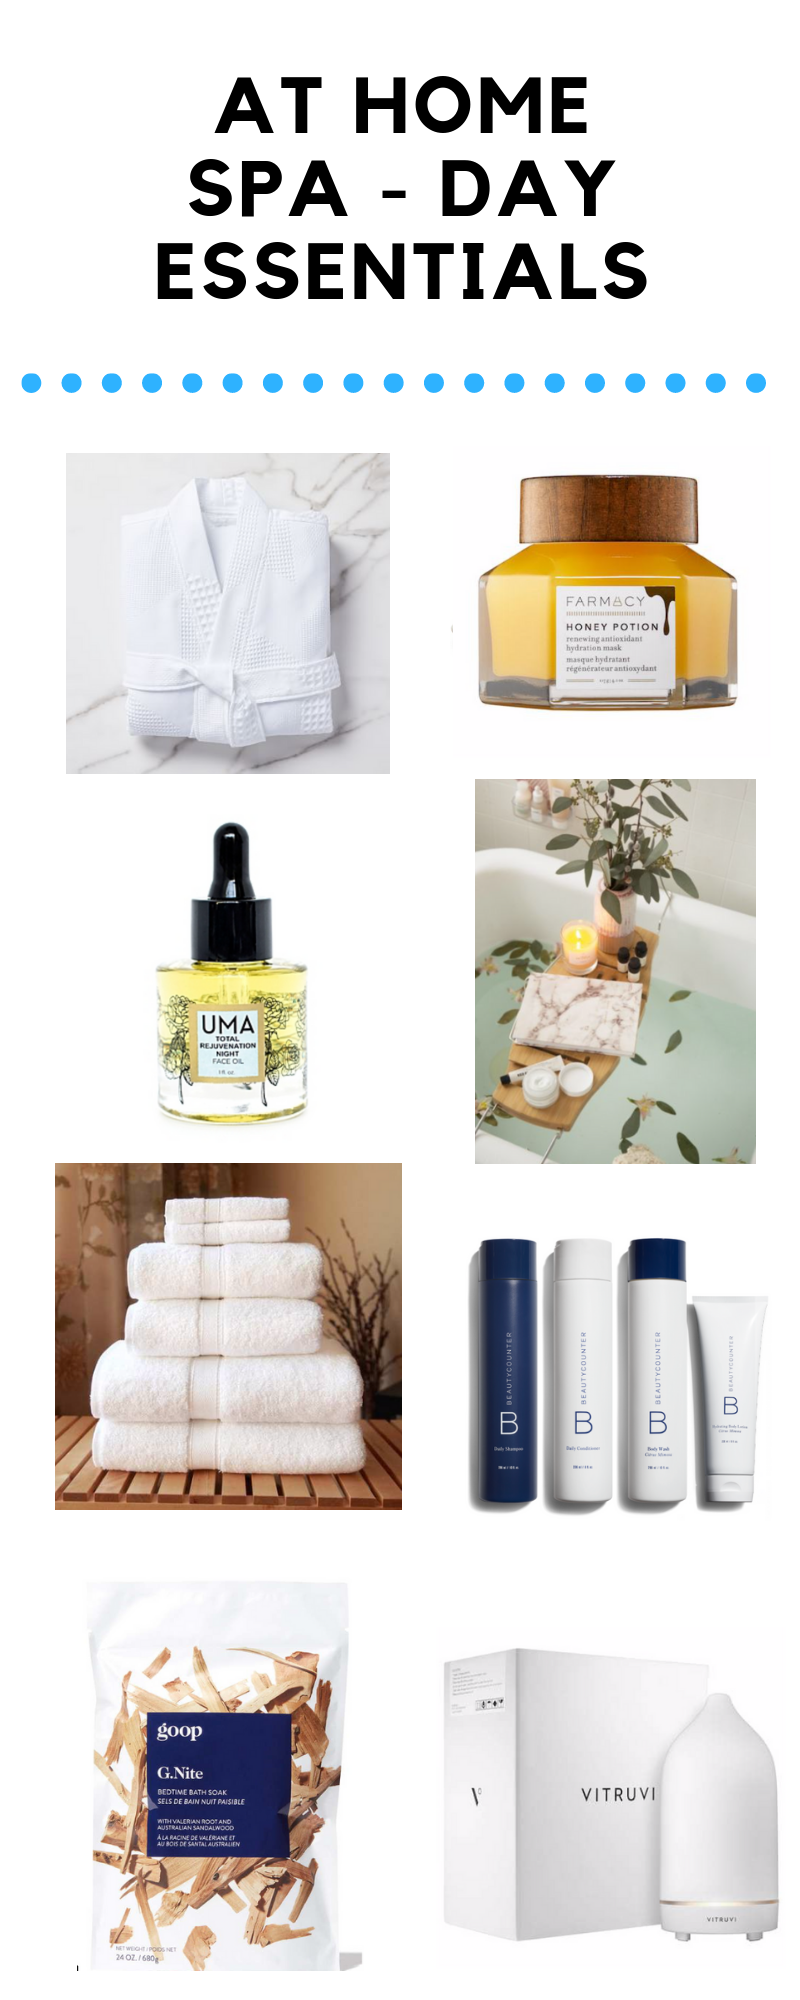 AT HOME SPA - DAY ESSENTIALS